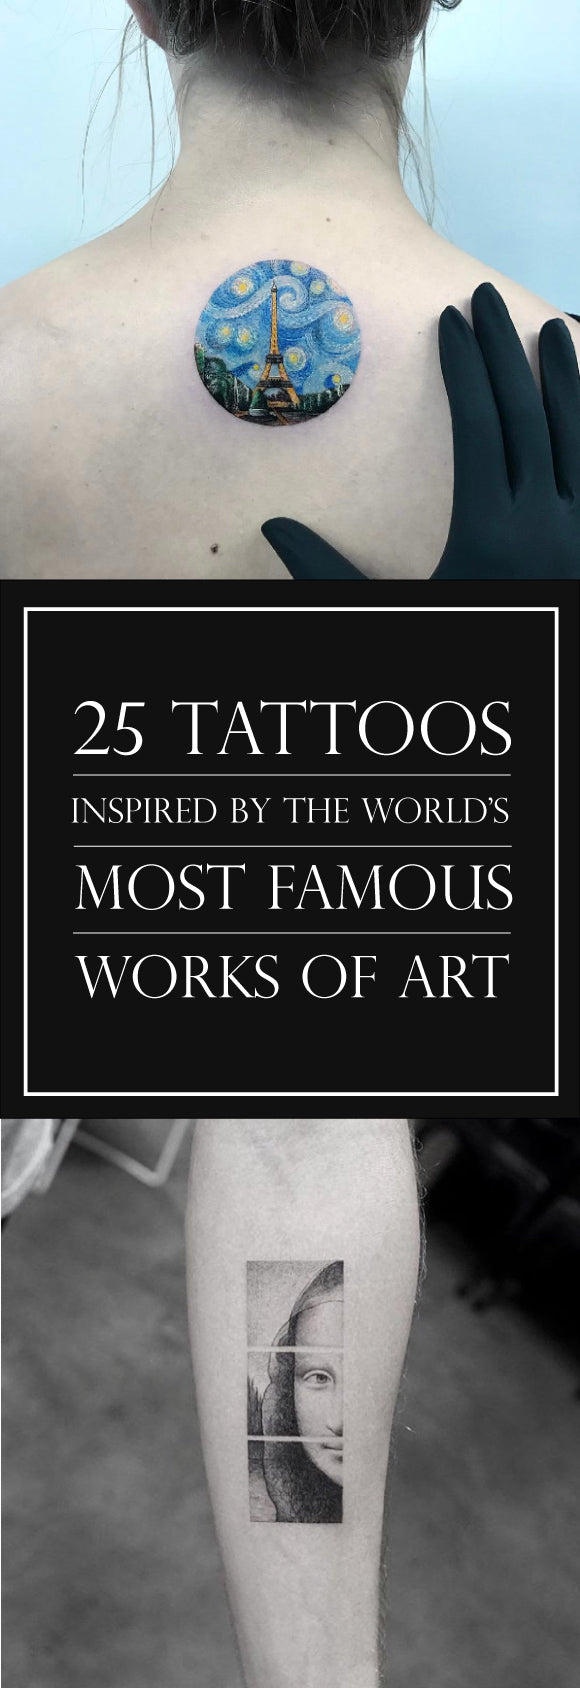 25 Tattoos Inspired by The World’s Most Famous Works of Art